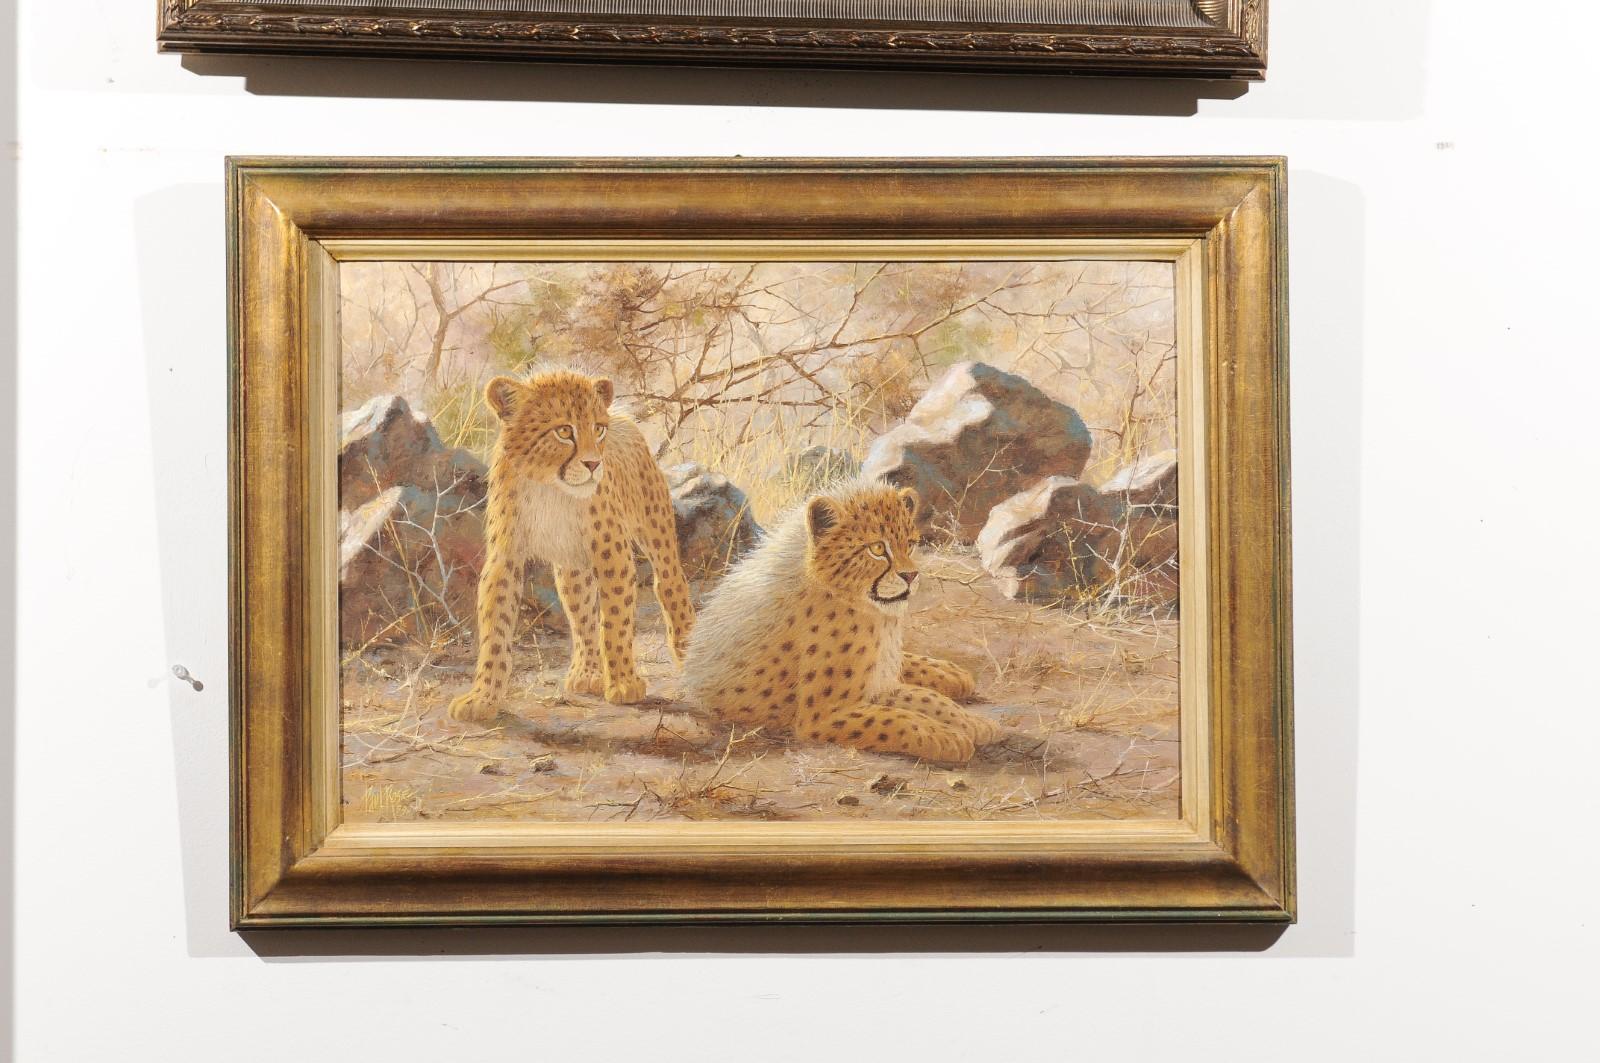 An original Paul Rose framed wildlife horizontal painting from the 20th century, depicting cheetahs. We are immediately subjugated by the two cheetahs depicted in the center of the composition. One of them standing on its paws, the other one